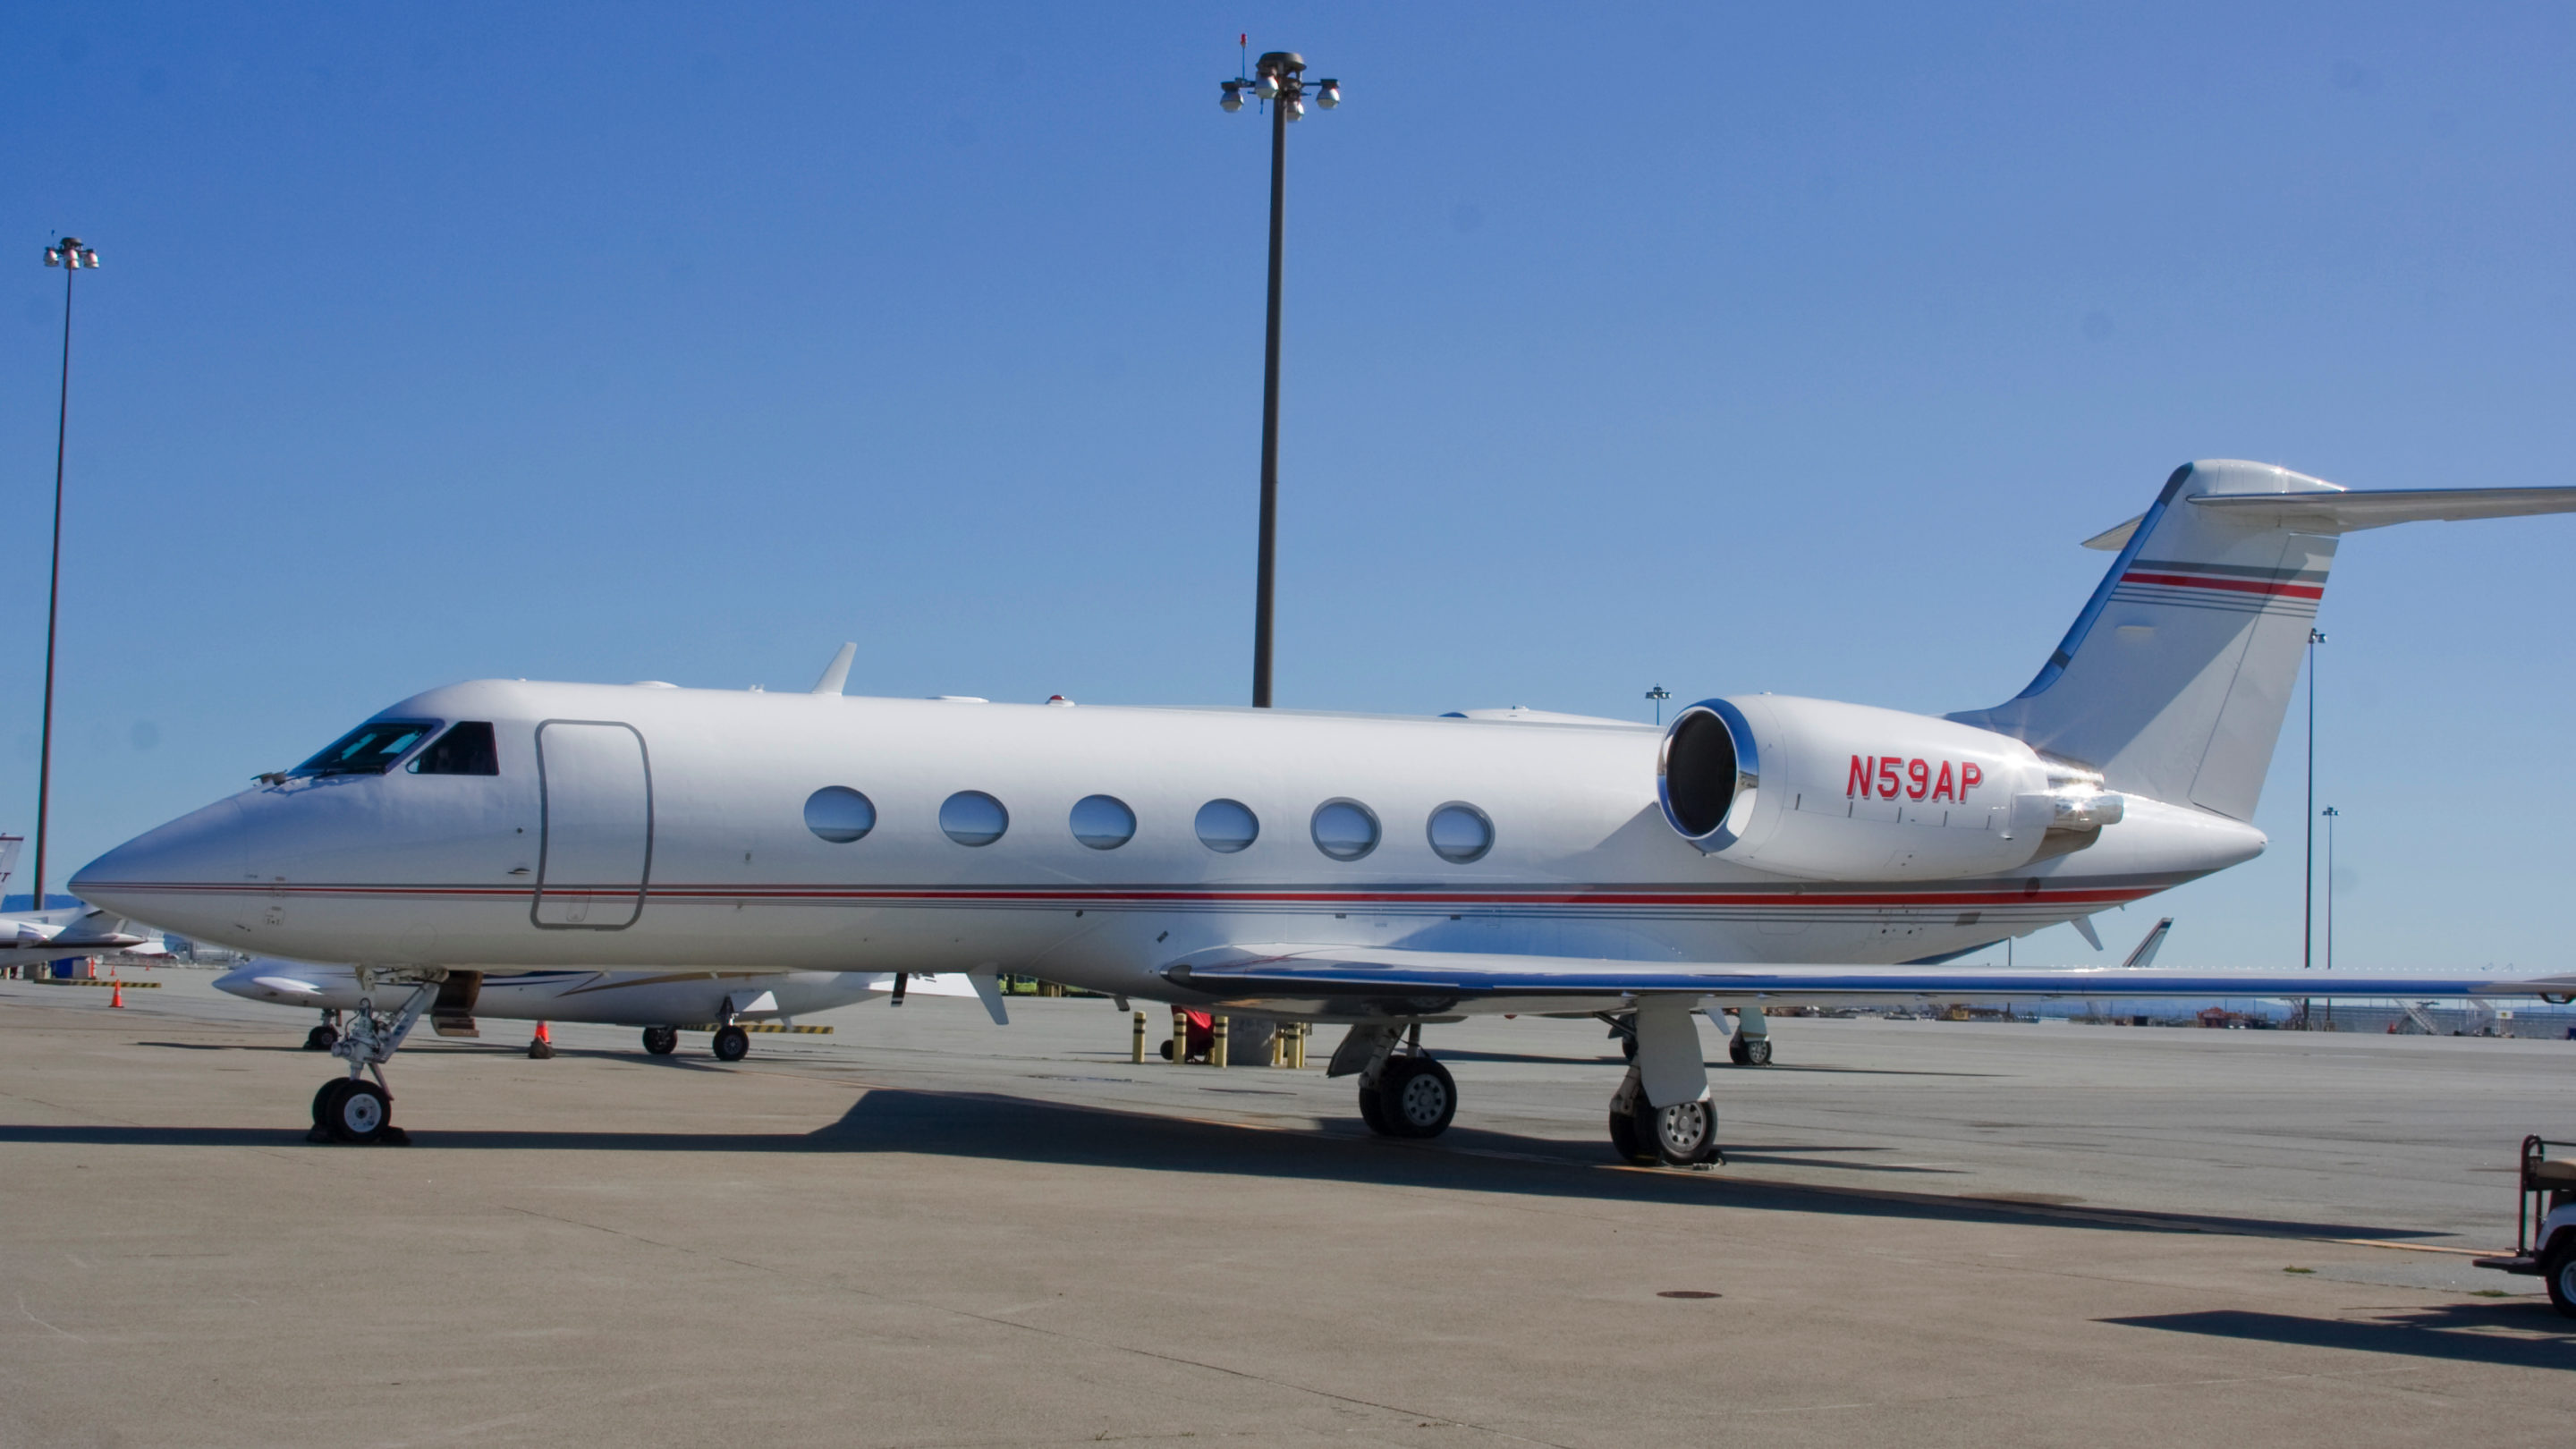 jet expenses, gulfstream g450, gulfstream g450 price, cost of owning a private jet, g450, g4 plane, g4 jet, gulfstream price, gulfstream g650 price, g450 price, how much does it cost to run a private jet, how much does it cost to own a private jet, gulfstream g450 jet price, the cost of owning a private jet, gulfstream g4, g650 price, private jet cost to own, g4 plane price, gulfstream g550 price, g5 jet price, g4 jet price, private jet annual maintenance cost, how much to operate a private jet, g5 jet, gulfstream cost, g6 jet price, g6 plane price, private jet crew cost, g 450, g450 plane, cost to maintain private jet, how much does a gulfstream g450 cost, g4 airplane, private jet maintenance cost, g450 jet price, gulfstream g450 rance, how much does it cost to fuel a private jet, gulfstream g4 price, gulfstream jet cost, g5 jet cost, private jet operating costs, how much does a g5 cost, g5 plane, gulfstream 4, gulfstream iv operating cost, gulfstream jet price, gulfstream g650 cost, how much to run a private jet, gulfstream g550 operating cost, giv x g450 how much does a gulfstream cost, cost of jet ownership, how much is a g5 jet, how much is a g5, learjet costof ownership, g450 range, g6 private jet cost, gulfstream 5 price tag, cost of owning a jet, how much is a g6 jet, gulfstream g550 cost, g550 cost, private jet expenses, gulfstream g5 price, g550 price, g5 airplane cost, gulfstream lane price, g5 cost, g6 plane, how much is a new gulfstream g550, how much does a g5 private jet cost, how much cost to own a private jet, g5 cost, private jet service cost, g5 plane price, gulfstream g450 interior, g450 cost, how much is it to buy a private jet, g450 price new, how much does it cost to operate a private jet, g4 jet cost, g450 et, how much does a jet cost to buy, g450 private jet, gulfstream g500 operating costs, g4 private jet price, g4 airplane cost, g6 airplane price, gulfstream g450 cost, gulfstream g55, how much does it cost to maintain a private jet, how much does it cost to maintain a private jet, how much does a g6 cost, gulfstream g450 cost, fulgstream g450 cost per hour, gulfstream cost of ownership, gulfstream g450 price new, g4 plane cost, how much is a gulfstream 6, how much does a g4 cost, how much does a g6 jet cost, g5 cost per hour, g6 plane cost, how much is a g4 jet, private jet ownership cost, gulfstream v, gulfstream g550 operating cost, private jet operating cost, best private jets 2017, citation jet cost per hou, private jet fuel, cessna citation cost per hour, honda jet price, honda jet for sale, honda jet cost, honda jet cost per hour, how much does a honda jet cost, private jet operating costs, how much is a honda jet, private jet cost, honda jet, honda light jet cost, honda jet operating cost, honda jet msrp, cost of owning a jet, how much does the honda jet cost, honda jet price uk, cost of new honda jet, honda ha 420 hondajet price, cost jet, honda vli price, new honda jet price, honda jet price 2017, how much to operate a private jet, honda plane price, honda private jet, how much is a jet ski, jet ski cost, how much does a jet ski cost, average jet ski price, how much jet ski cost, cost of owning a jet ski, waverunner cost of ownership, how much does it cost to buy a jet ski, seadoo maintenance cost, how much to winterize a jet ski, jet ski cost of ownership, jet ski repair cost, jet ski maintenance, jet ski service, jet ski prices new, how much does it cost to winterize a jet ski, waverunner cost, how much is a waverunner, how much is a brand new jet ski, how mucch is a used jet ski, jet ski maintenance costs, jet ski service cost, jet ski cost to buy, how to maintain a jet ski, are jet skis worth it, how much does a jet ski engine cost, are jet skis worth the money, is buying a jet ski worth it, zetta jet cost, private jet charter cost, charter jet cost, private jet cost, charter plane cost, private jet rental cost, charter flight cost calculator, charter flight cost, private jet charter prices, how much is a private jet flight, how much to rent a private jet, how much does it cost to rent a private jet, how much to charter a jet, how much to charter a plane, how much is it to rent a private jet, charter jet prices, how much does it cost to charter a plane, private jet rental prices, private plane charter cost, plane cost, private jet charter cost estimator, private jet to las vegas cost, how much to charter a private jet to las vegas, how much does it cost to charter a jet, private flight cost, charter plane price, private jet flight cost, how much to charter a jet to vegas, how much to charter a private jet, how much does a private jet cost to rent, chartered flight price, private plane cost, how much does a charter flight cost, jet charter rates, how much to rent a jet, jet rental cost, how much does it cost to charter a small plane, charter airplane cost, private plane rental prices, how much it cost to rent a private jet, jet plane rental rates, private charter flights cost, cost of a private jet to rent, private jet cost estimator, private jet price flight,  jet hire cost, private jet to vegas cost, g4 plane rental cost, cost to charter private jet to hawaii, g5 jet, book a private plane cost, business jet charter prices, how much does it cost to charter a small jet, what does it cost to charter a private plane, new york new orleans san fancisco cleveland quote, how much is it to charter a private jet, charter plane la to vegas, private jet houston to las vegas price, how much does a private jet to vegas cost, private jet calculator, business jet rental prices To enable screen reader support, press ⌘+Option+Z To learn about keyboard shortcuts, press ⌘slash  